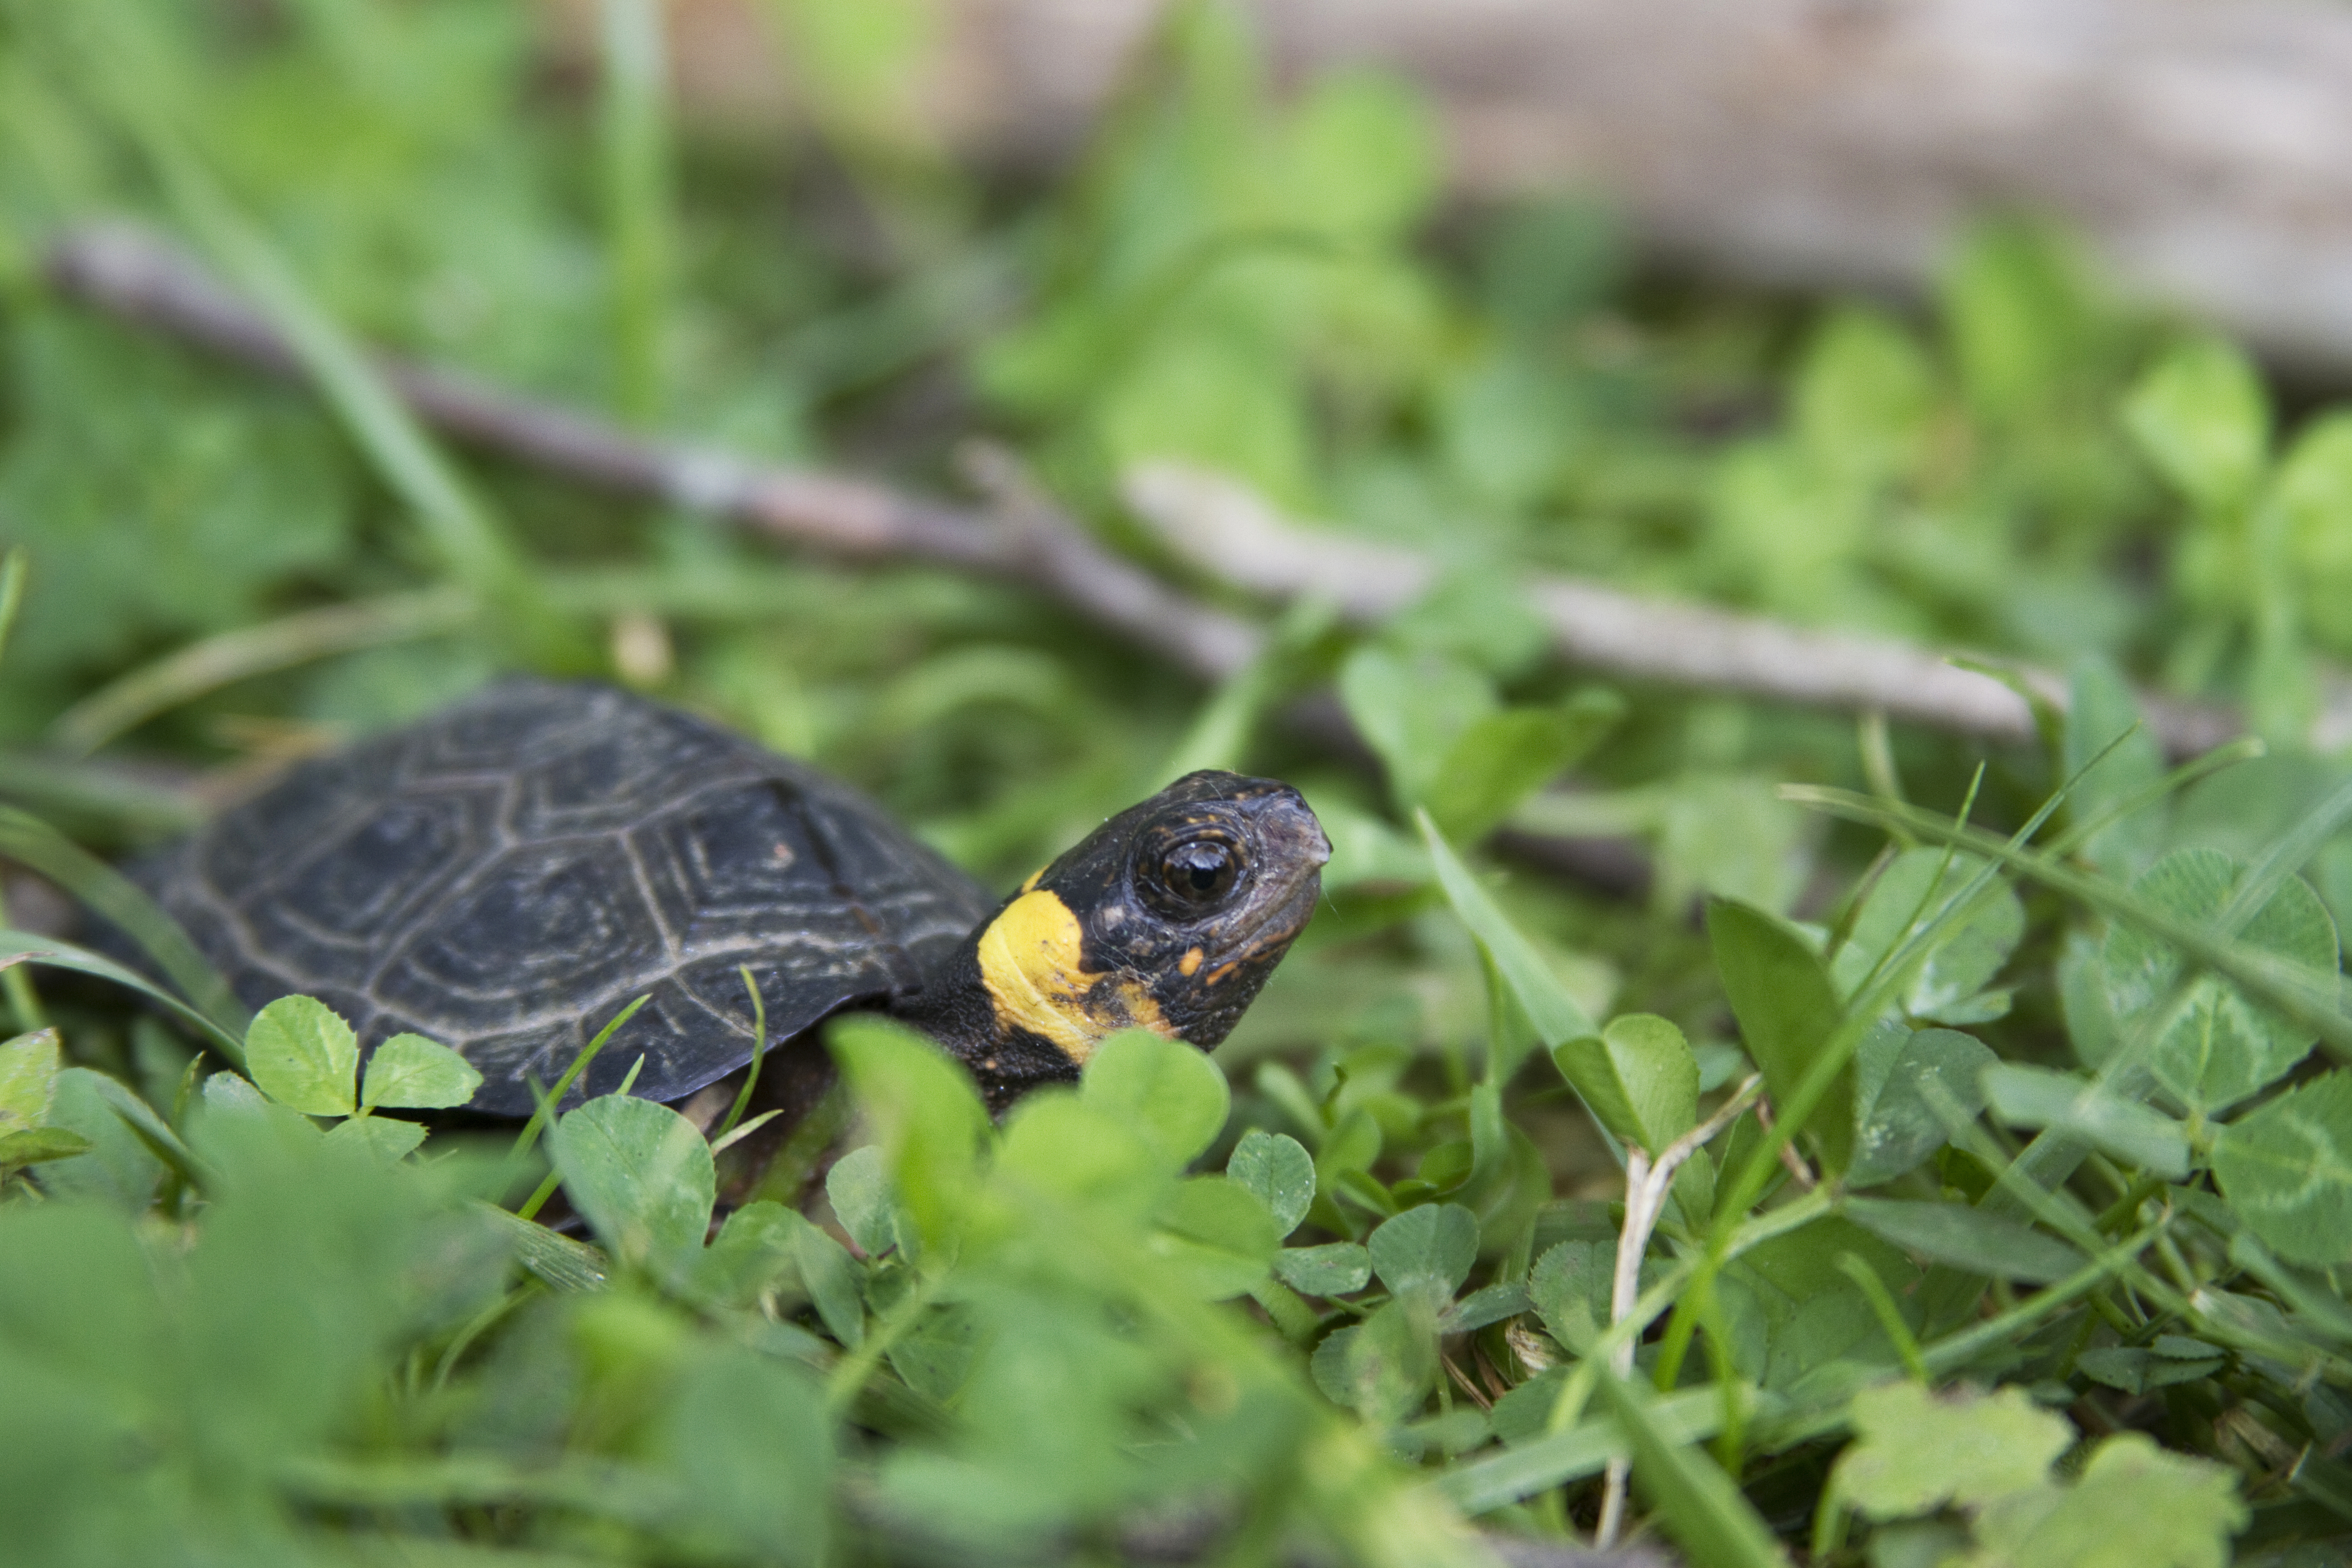 A small turtle that is black and yellow sitting in clover